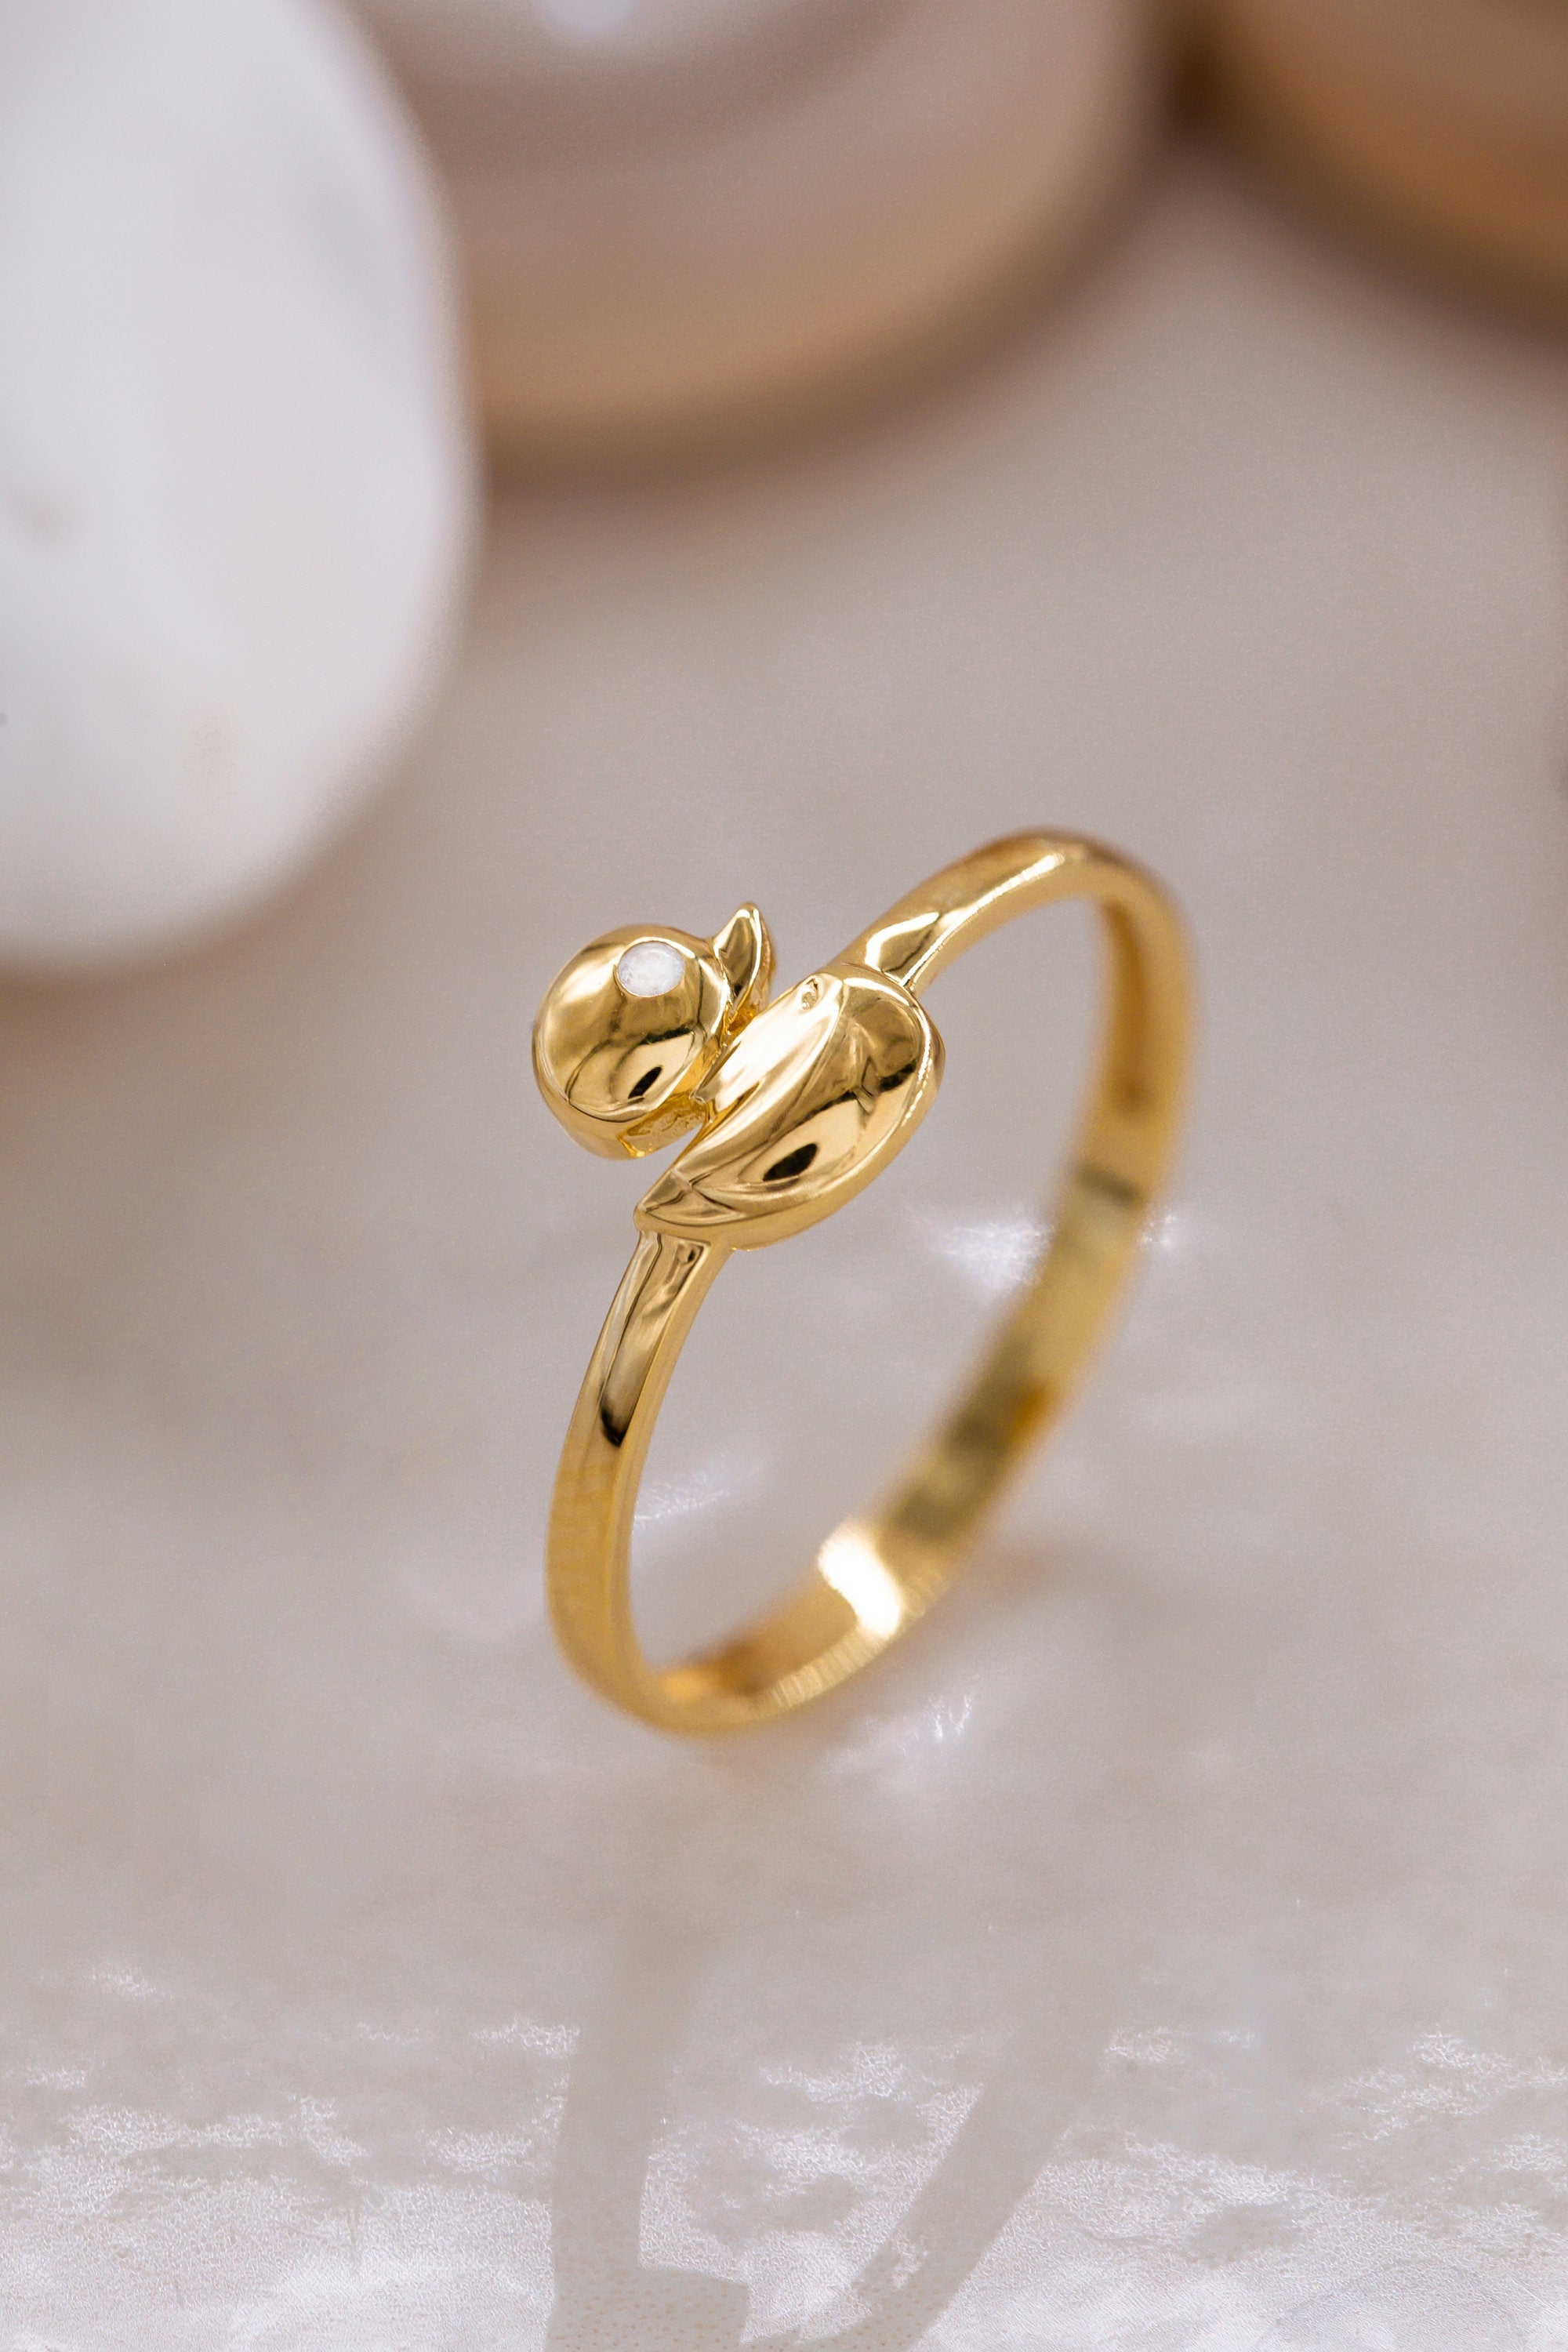 14K Golden Duck Ring, Bird Ring, 925 Cross Ring Sterling - Unique Handcrafted Jewelry, Animal Ring Silver, Ring for Women, Best Friend Gift